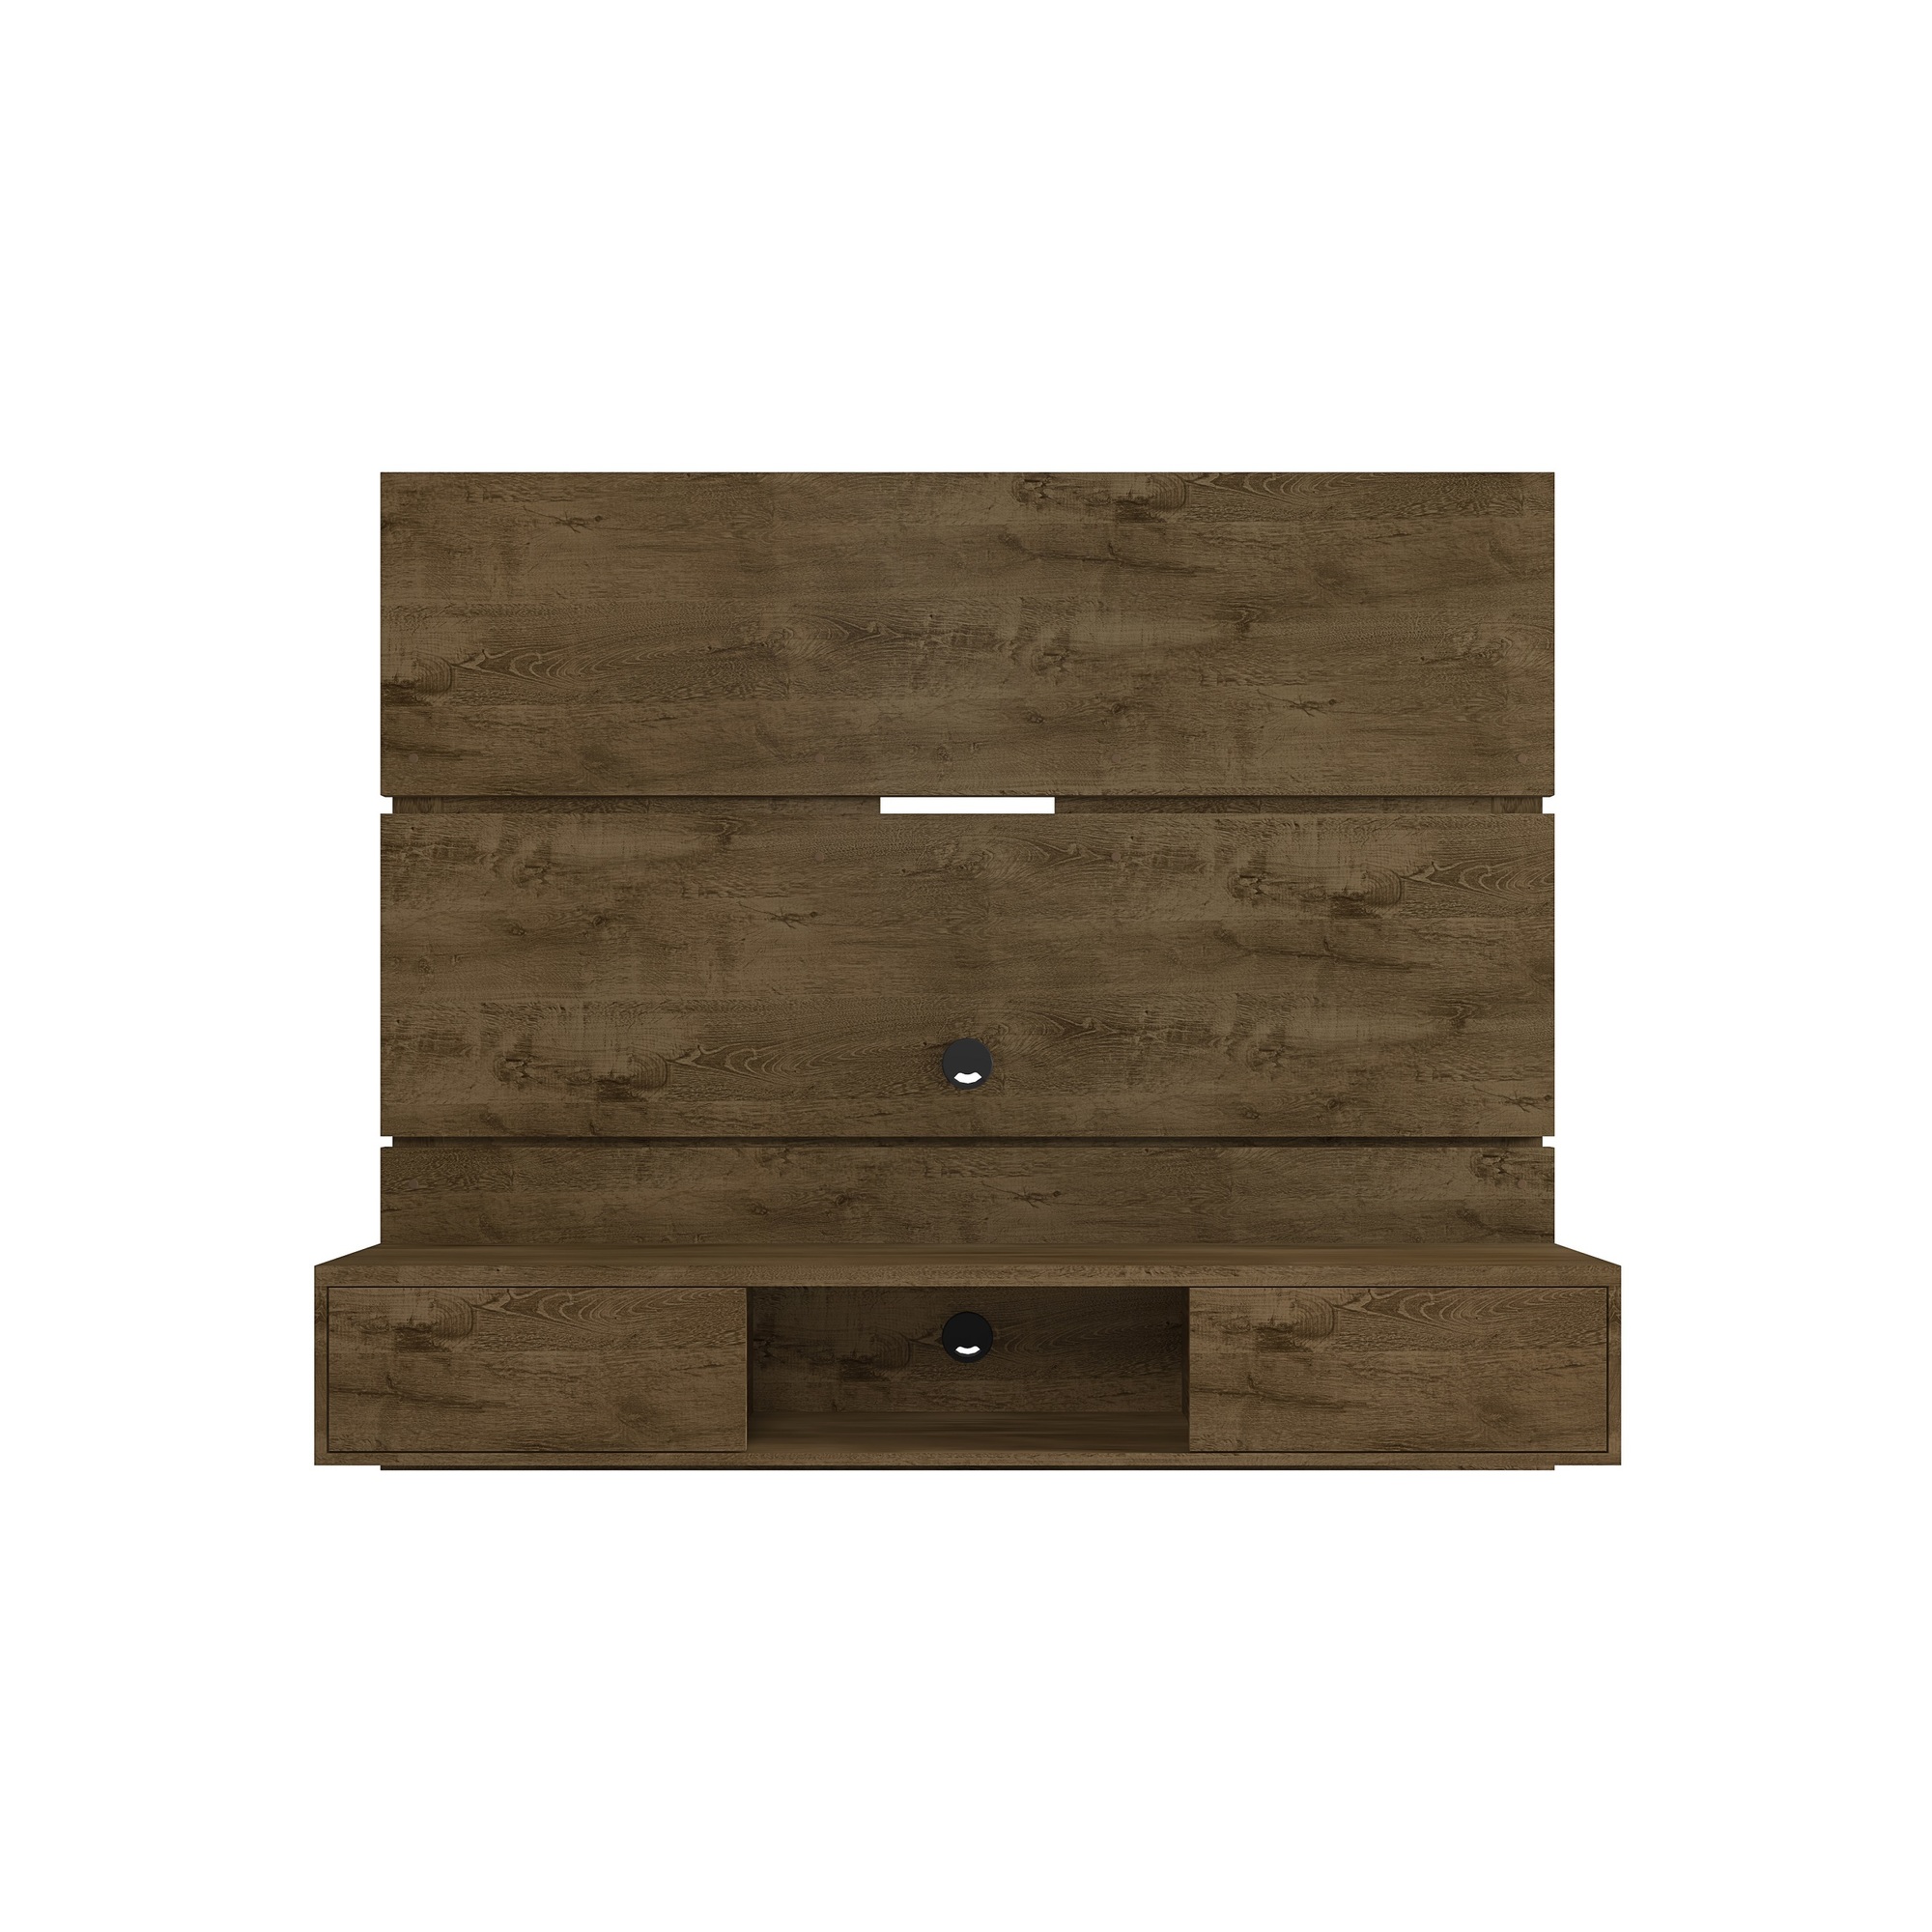 Manhattan Comfort, Vernon 62.99 Floating Wall Ent Cntr Rustic Brown, Width 62.99 in, Height 53.54 in, Depth 12.87 in, Model 236BMC